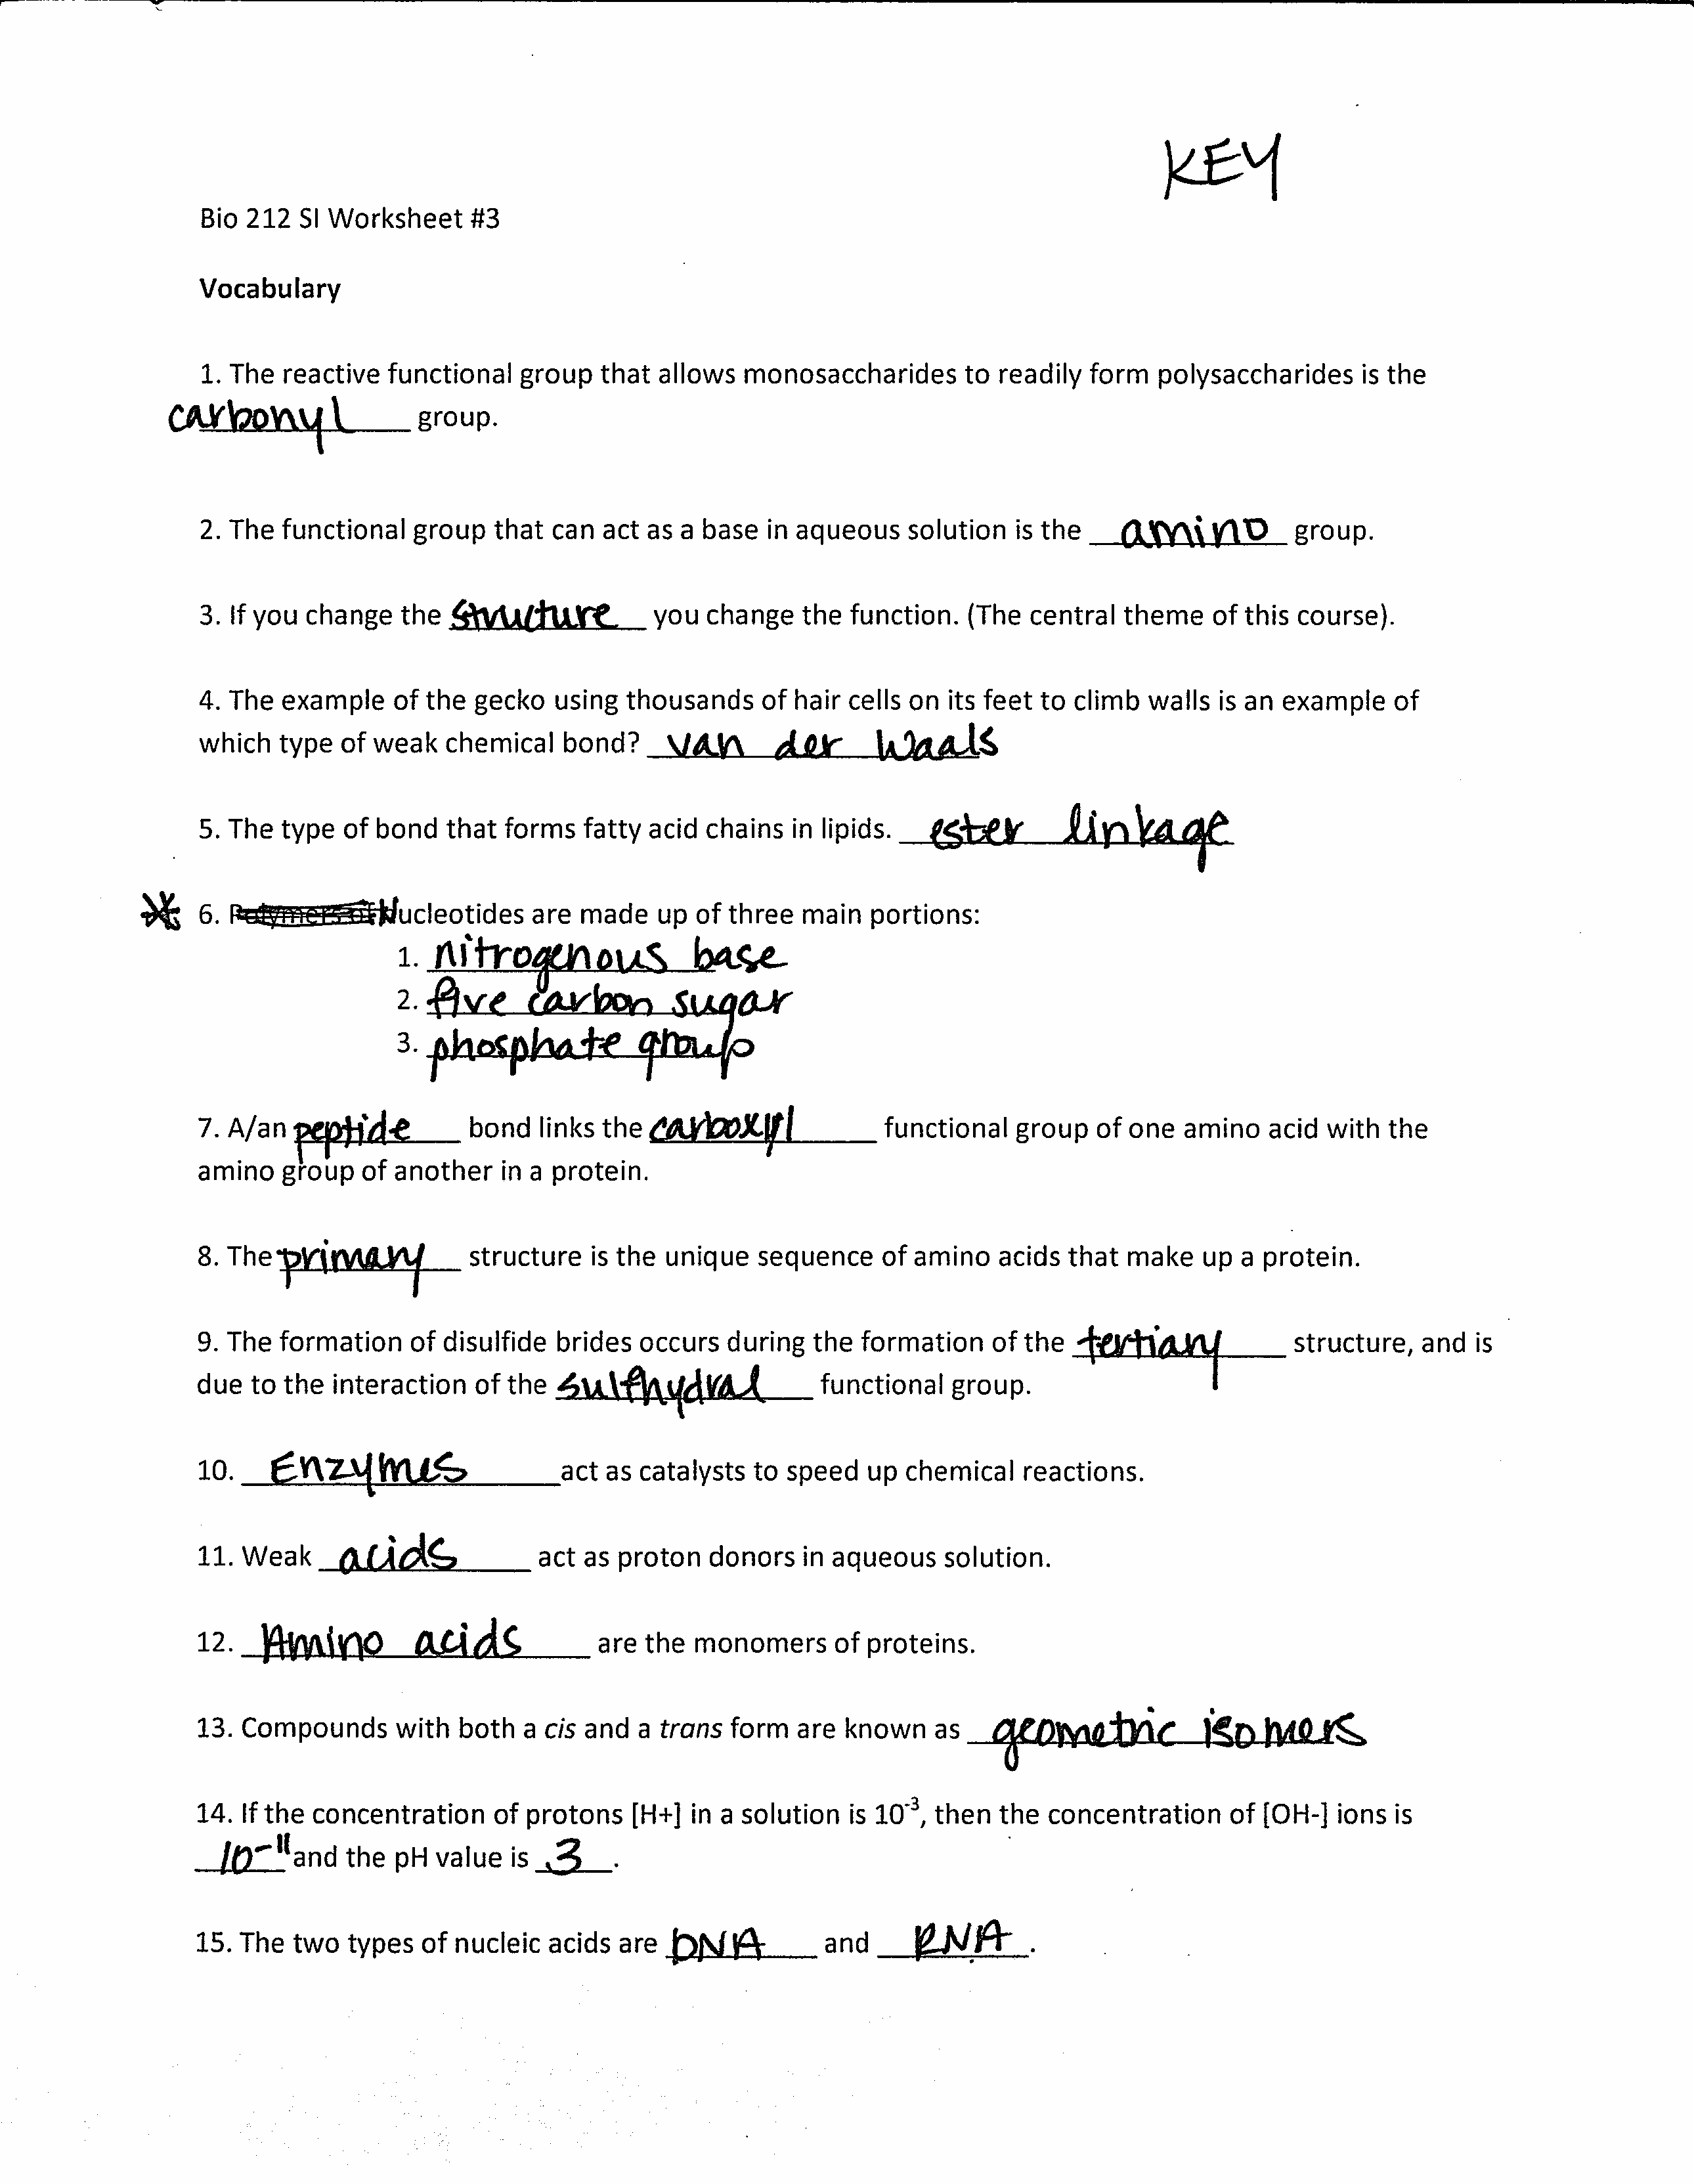 Dna And Replication Worksheet